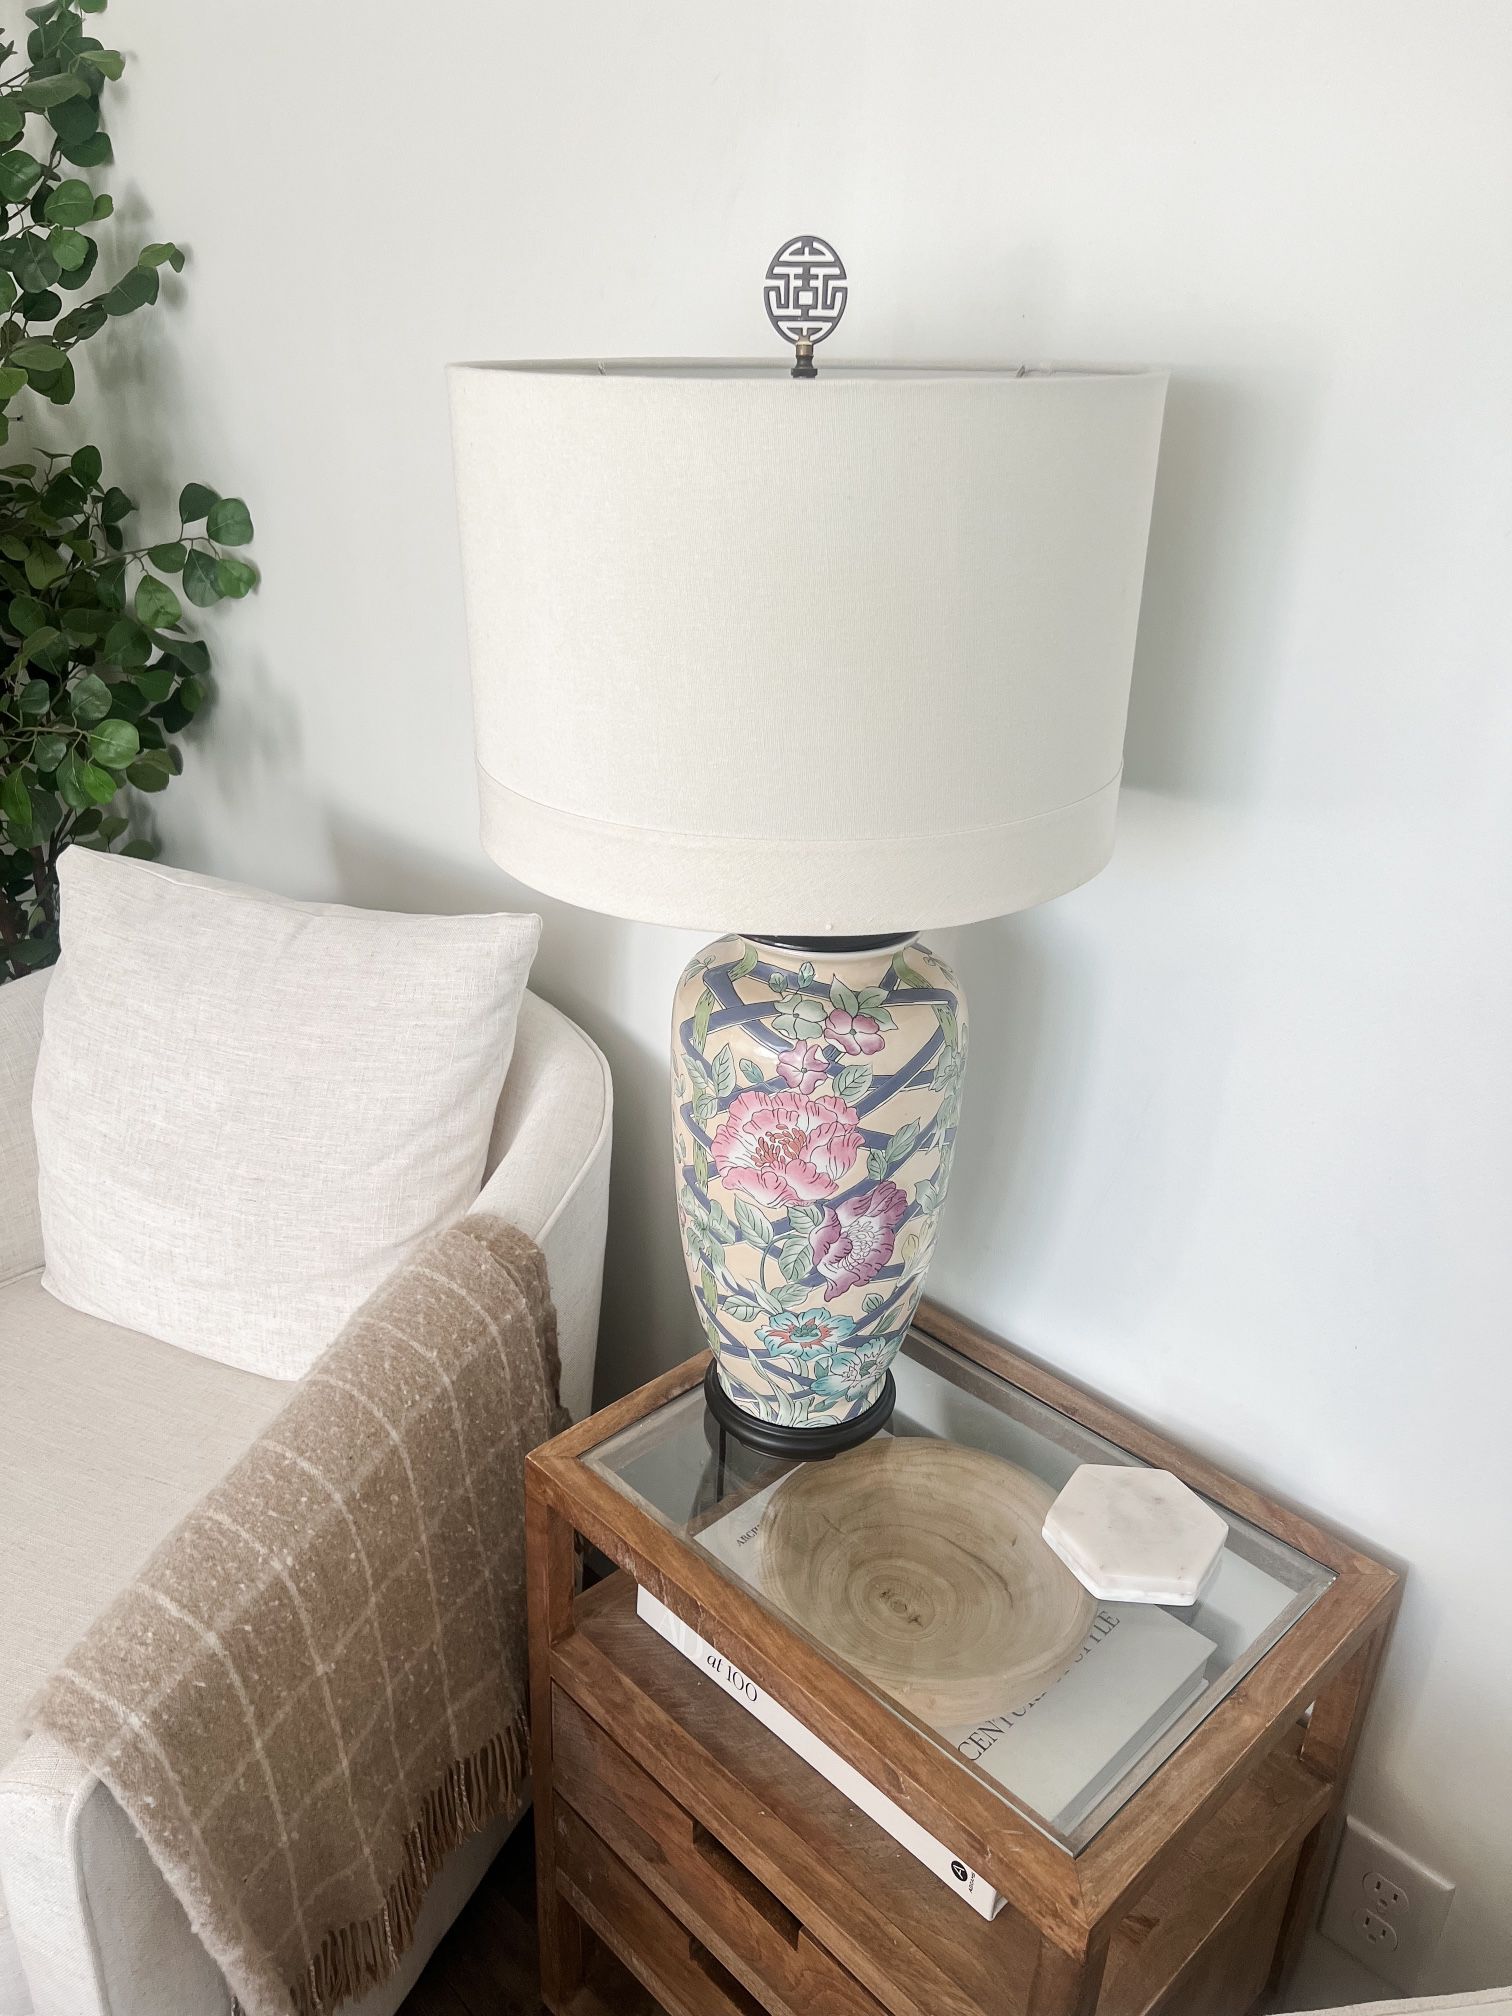 Vintage Chinoiserie Style Table Lamp with Floral Design